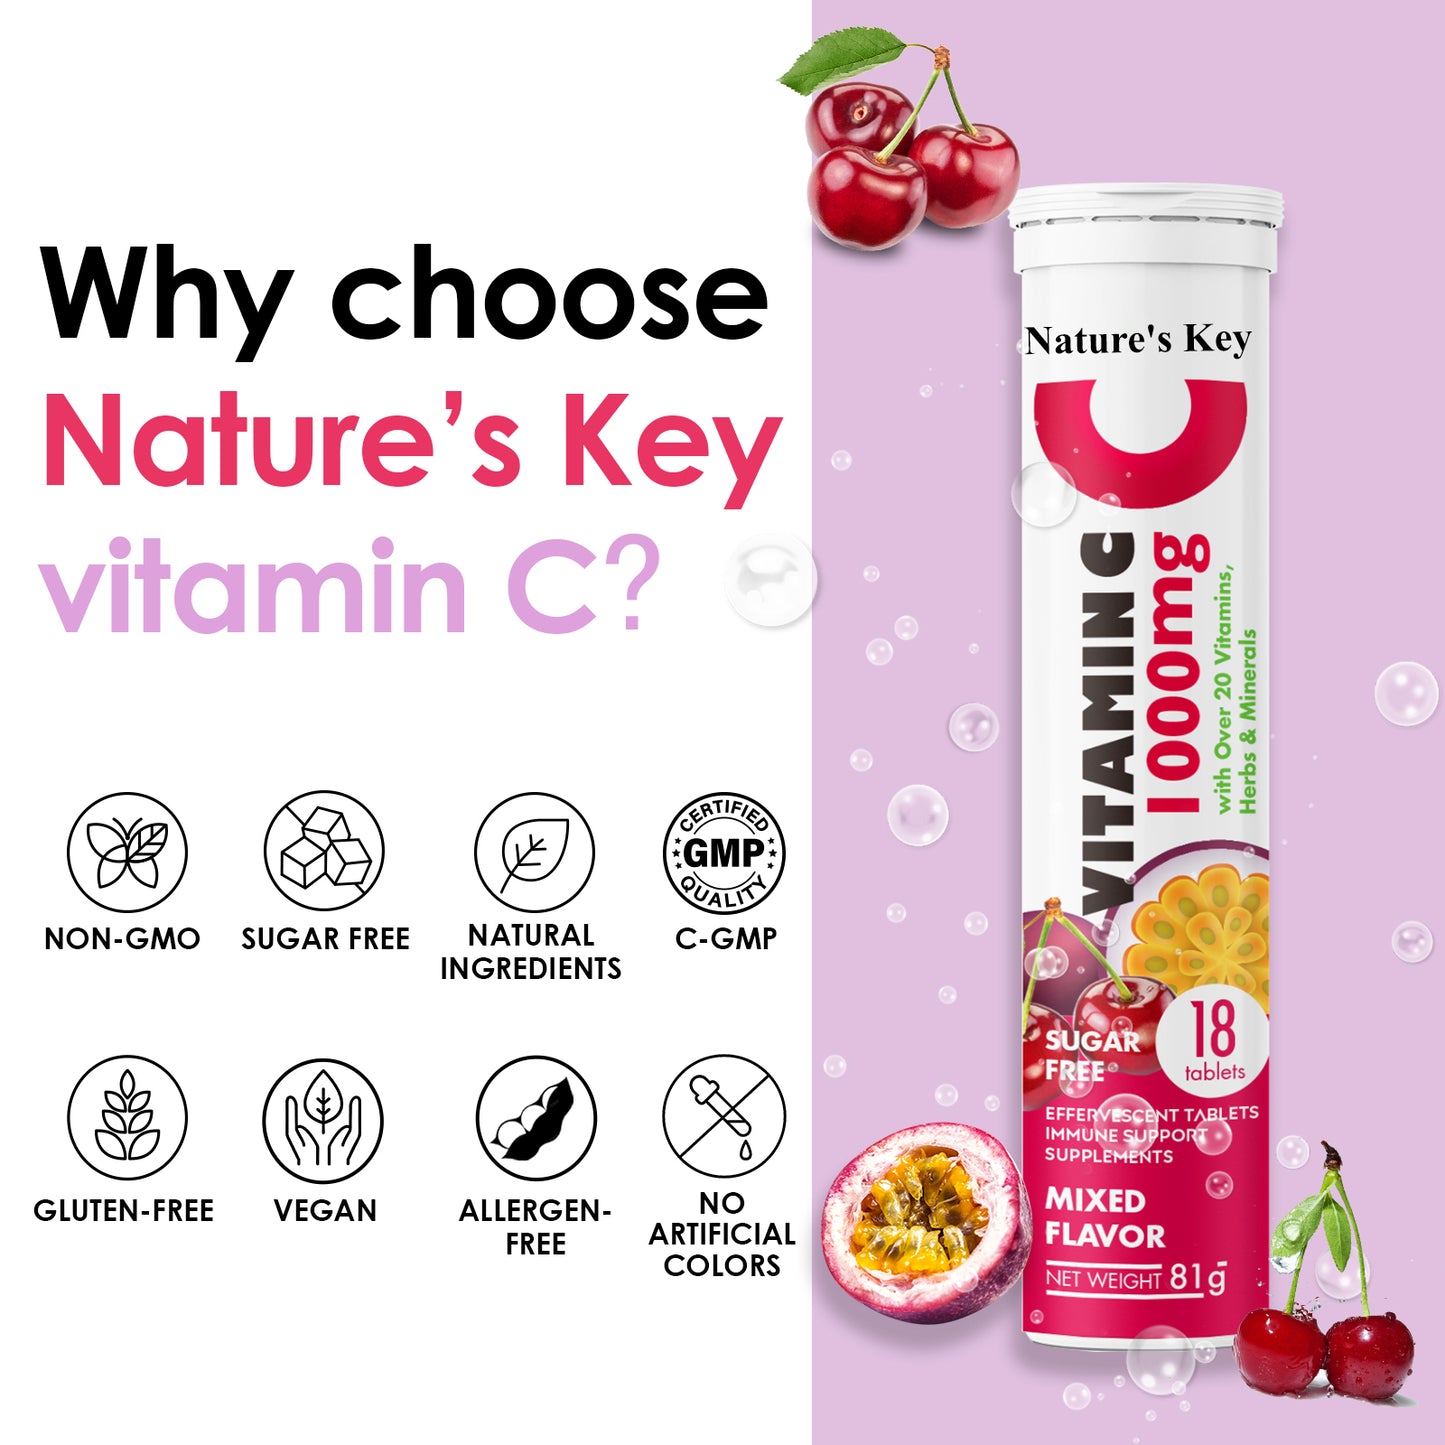 Nature's Key Vitamin C 1000mg with Over 20 Vitamins, Herbs & Minerals Immune Support Effervescent Tablets, Blast of Vitamin A, C, E, Zinc, Selenium, Echinacea & Ginger, Mixed Fruits 18 Count